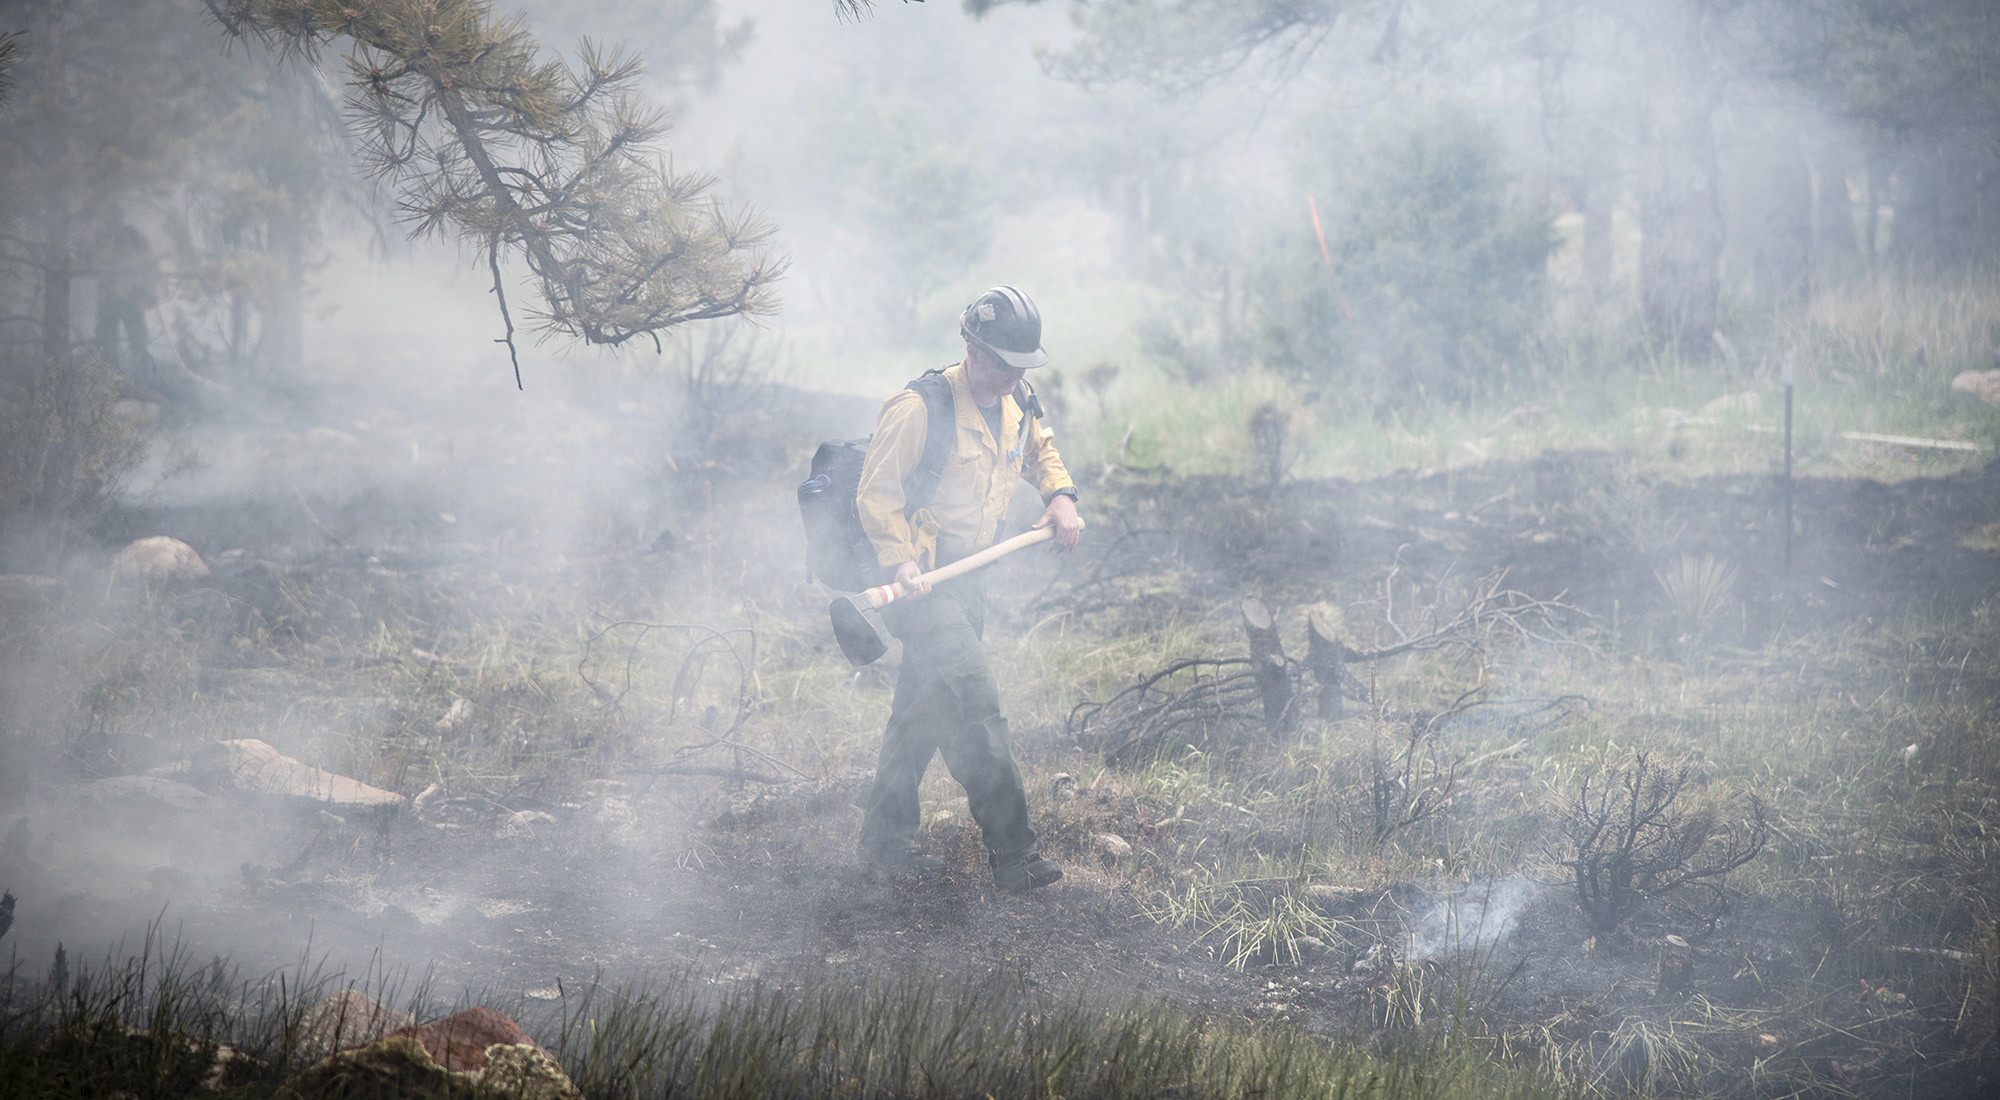 City of Boulder regularly conducts prescribed burns